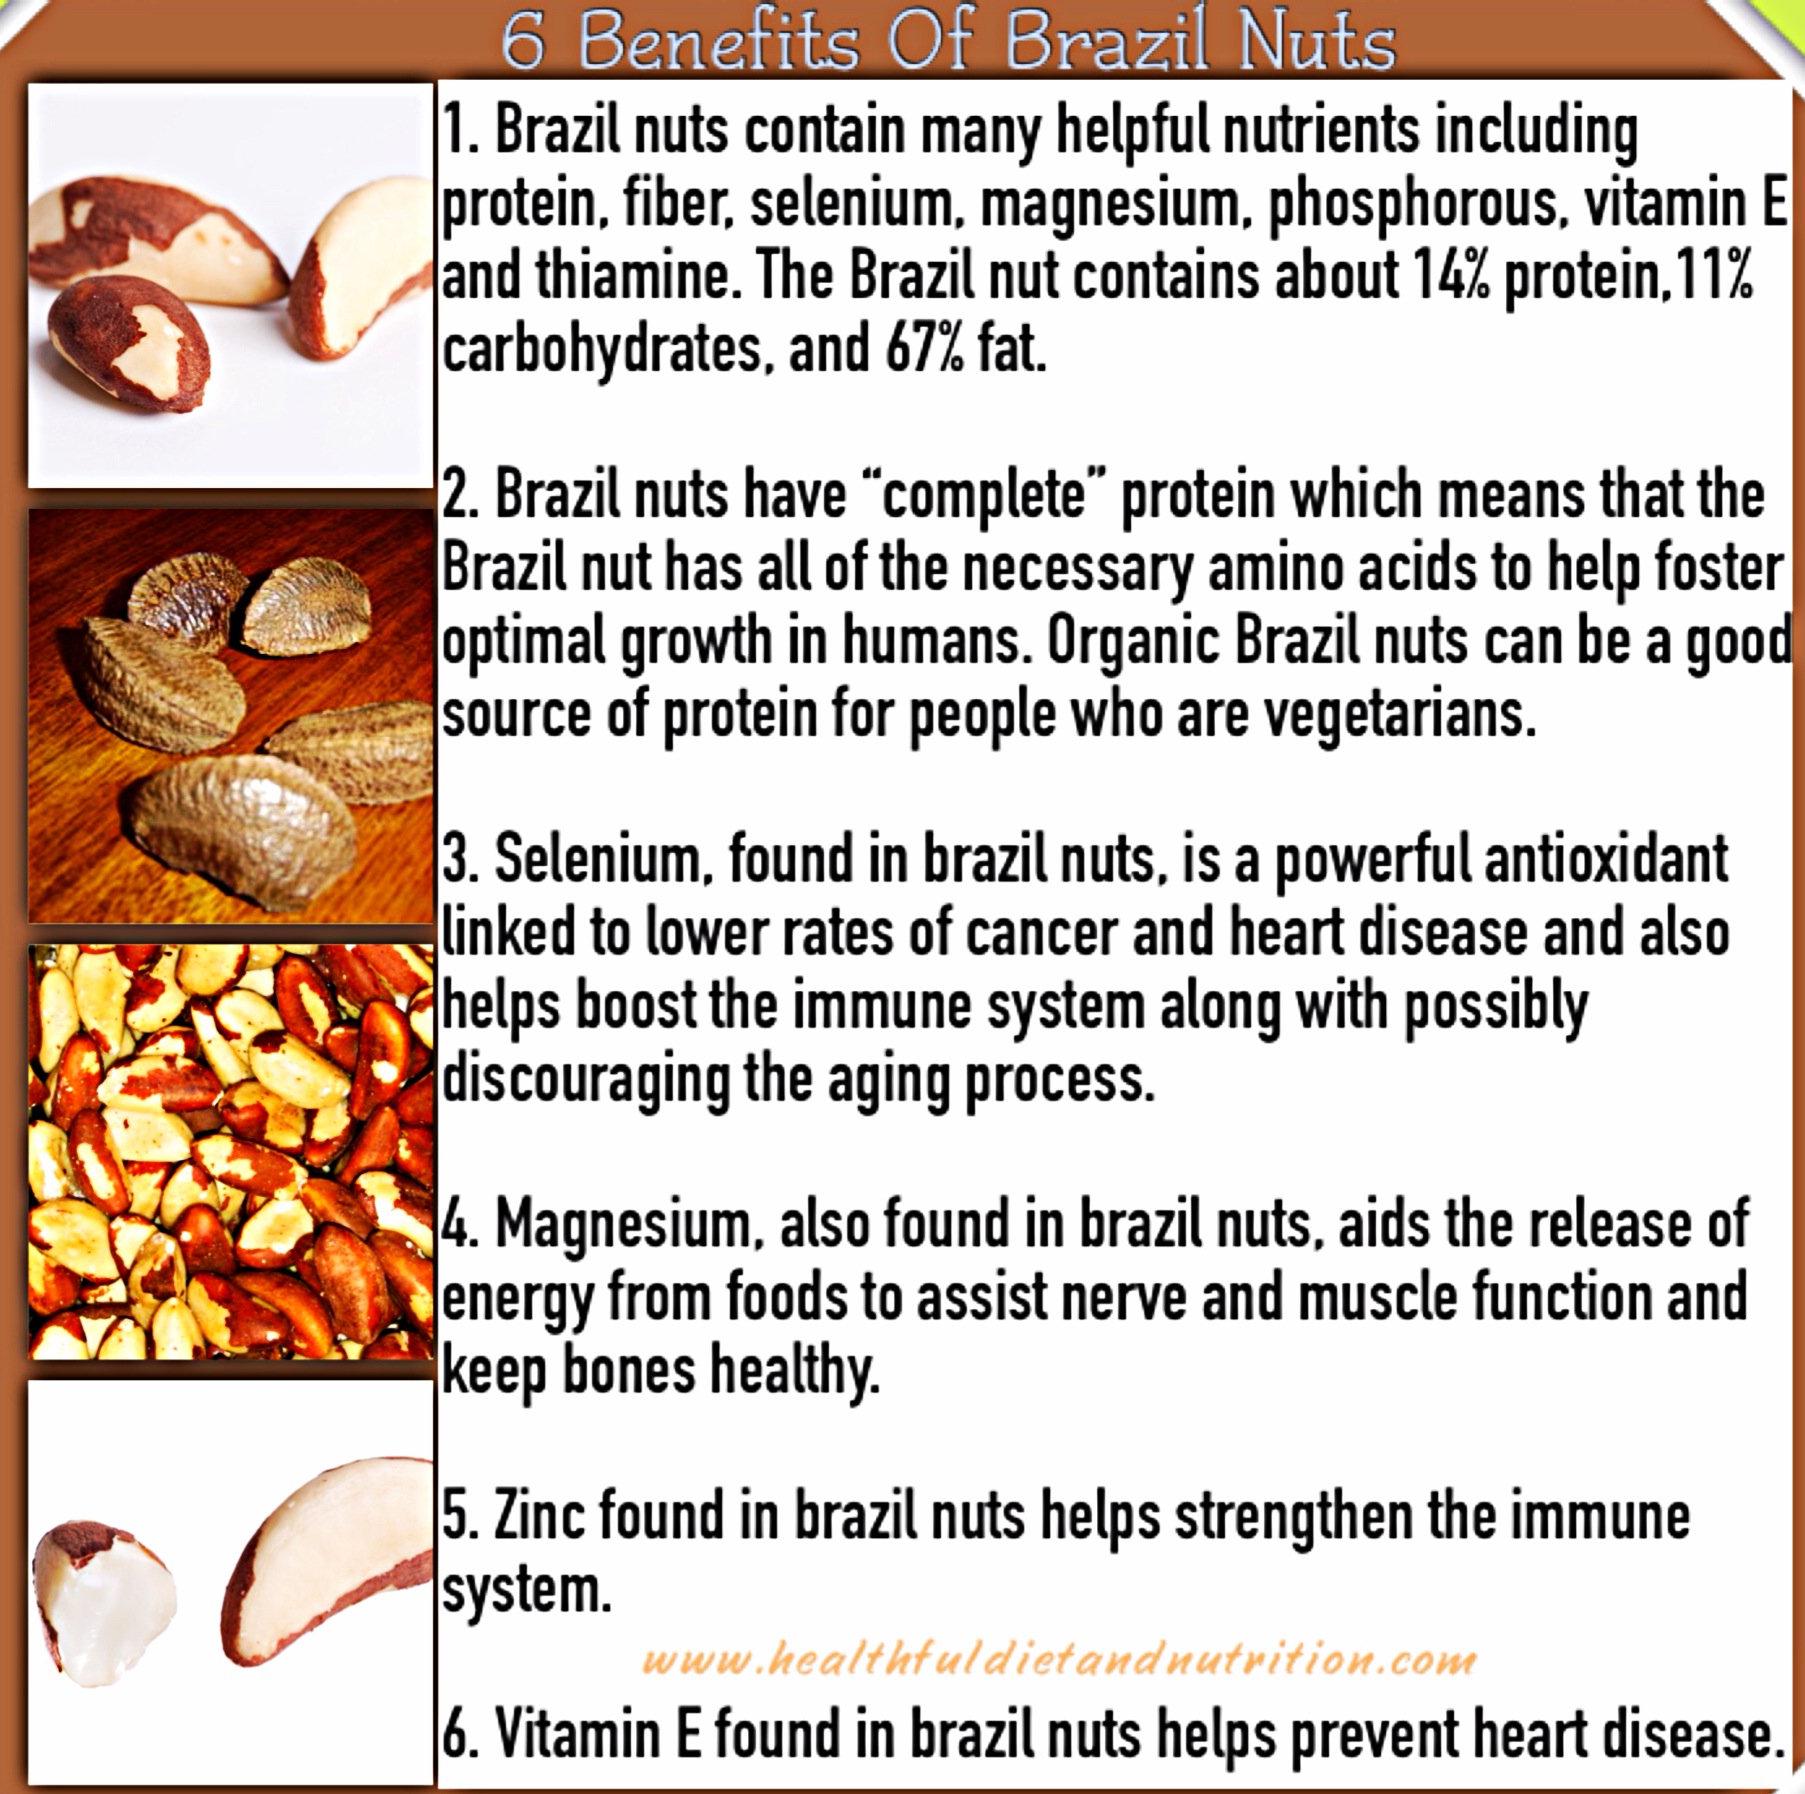 6 Benefits of Brazil Nuts